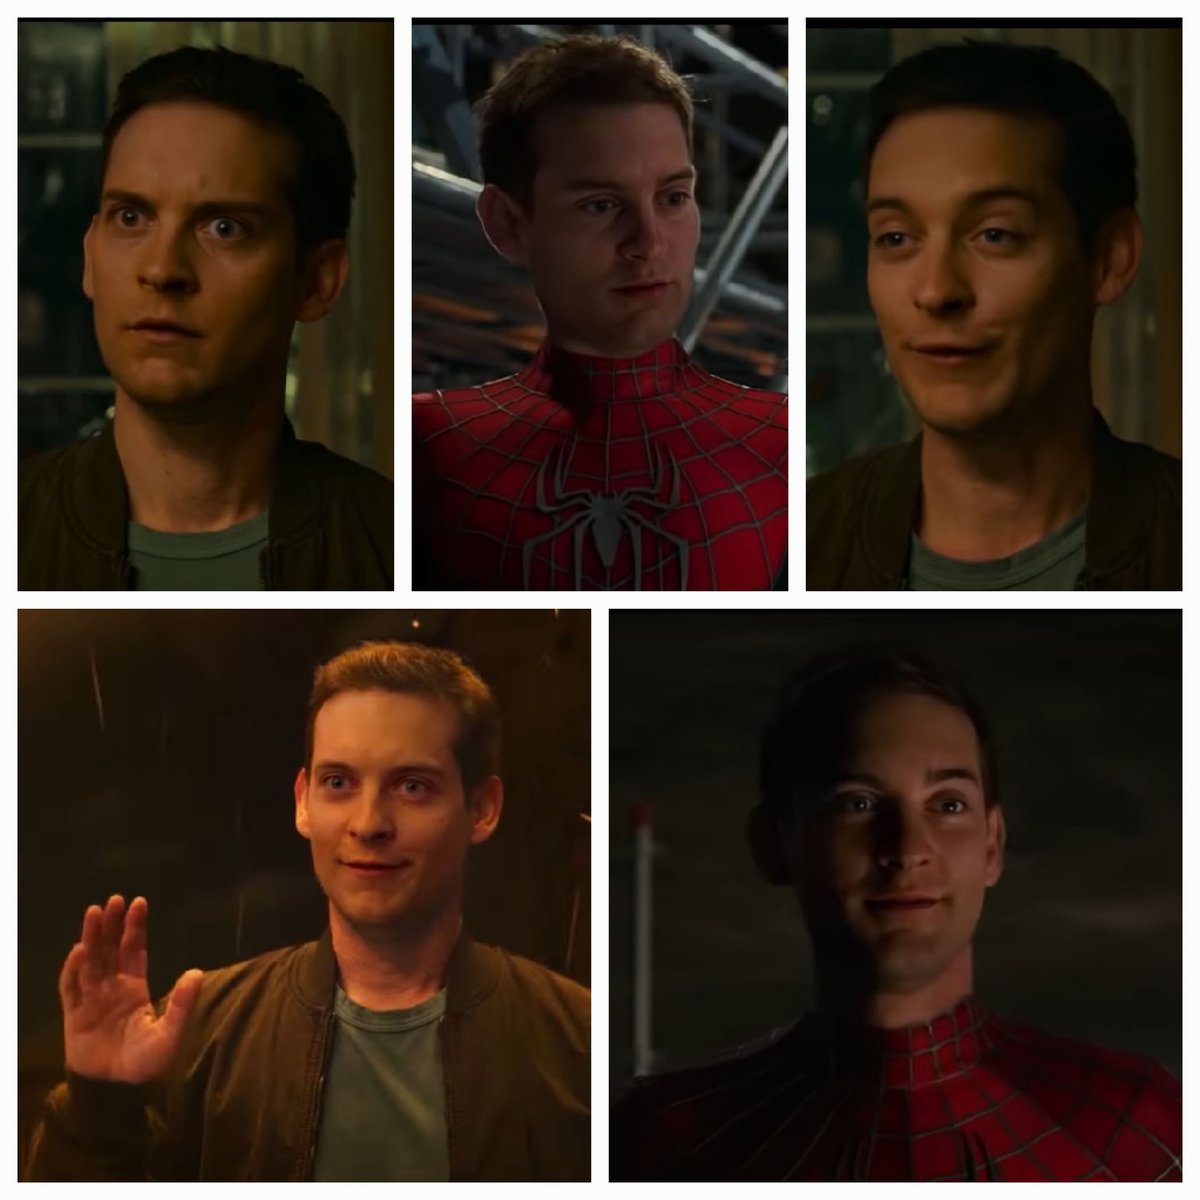 Can't get over how good de-aged Tobey Maguire from #SpiderManNoWayHome looks, simply by fans using deepfakes. Really completes the look for me, as if he's walked straight out of his other Spider-Man movies. Videos linked here: https://t.co/e38EnhLoe3
https://t.co/4wRf8B724T https://t.co/zb51AkRqES